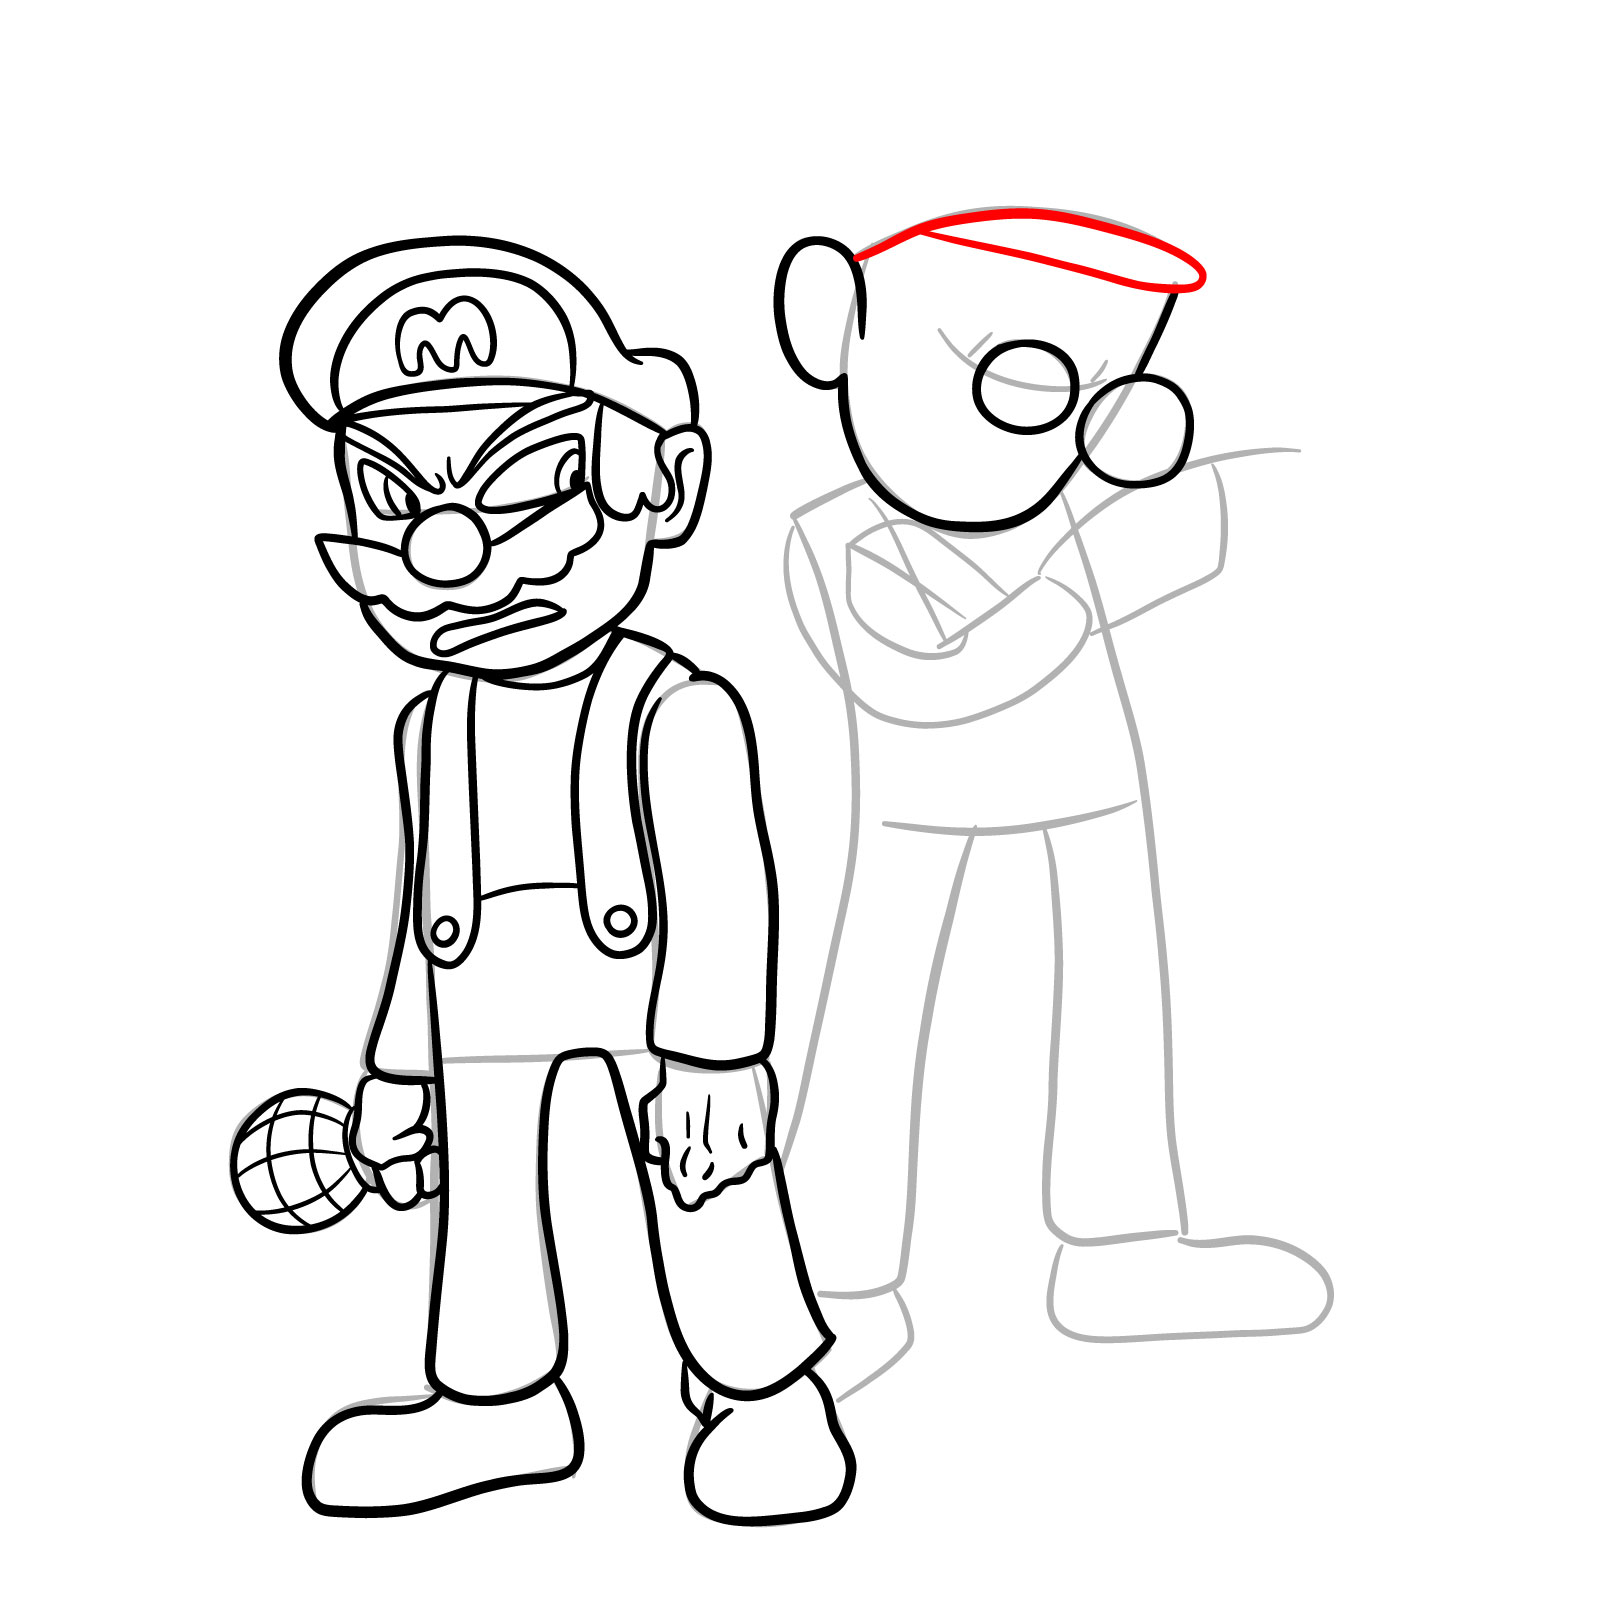 How to draw Mario and Luigi from Tails Gets Trolled - step 27